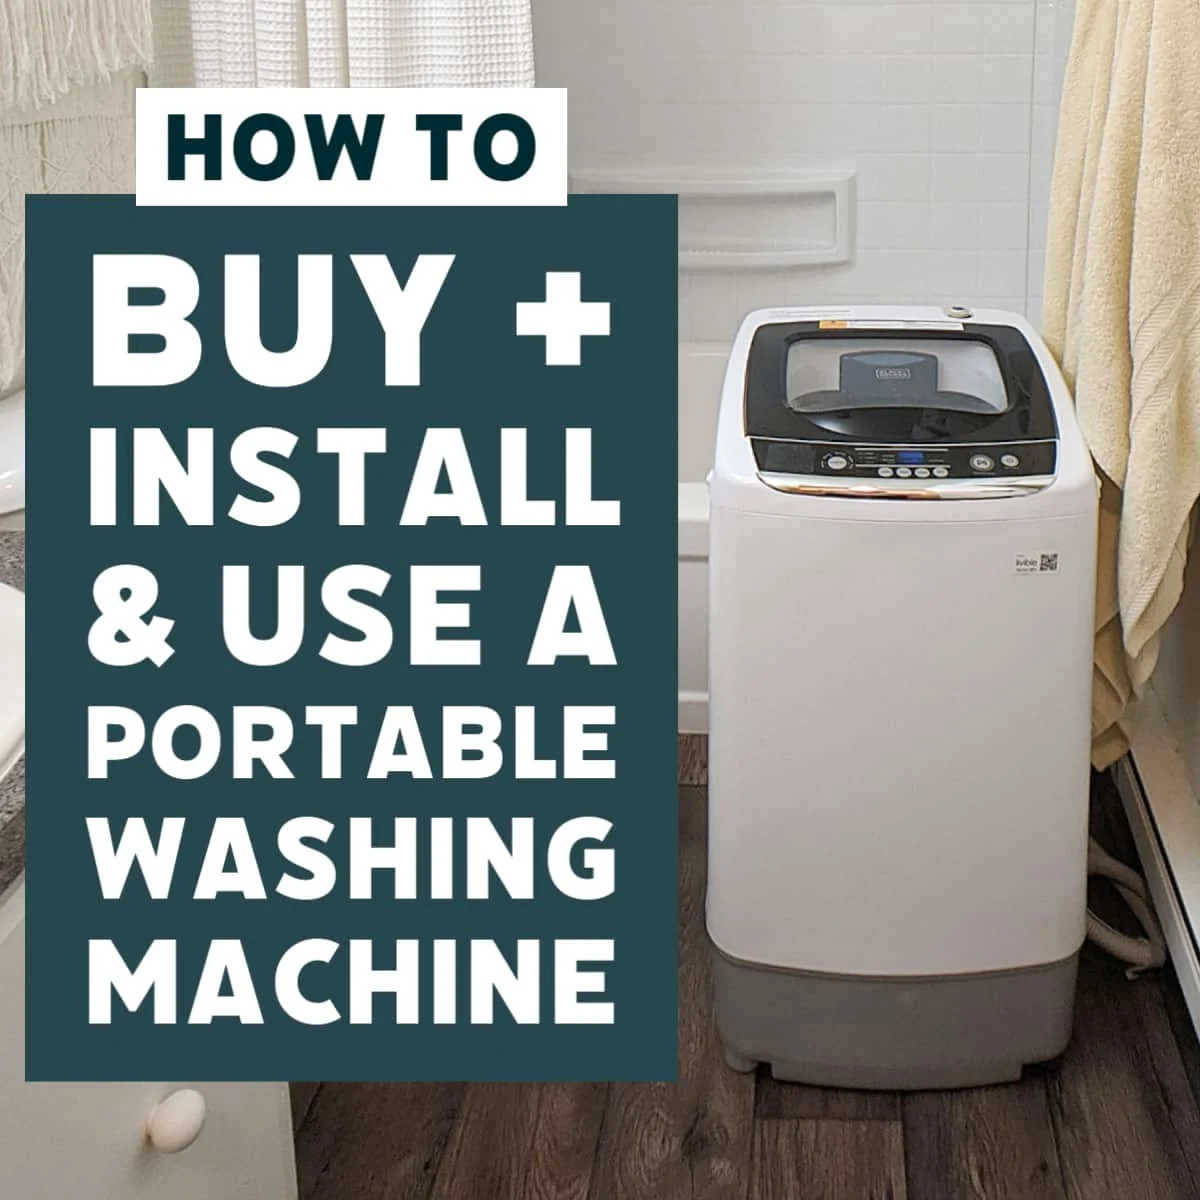 Machine portable up washing to sink hook How do